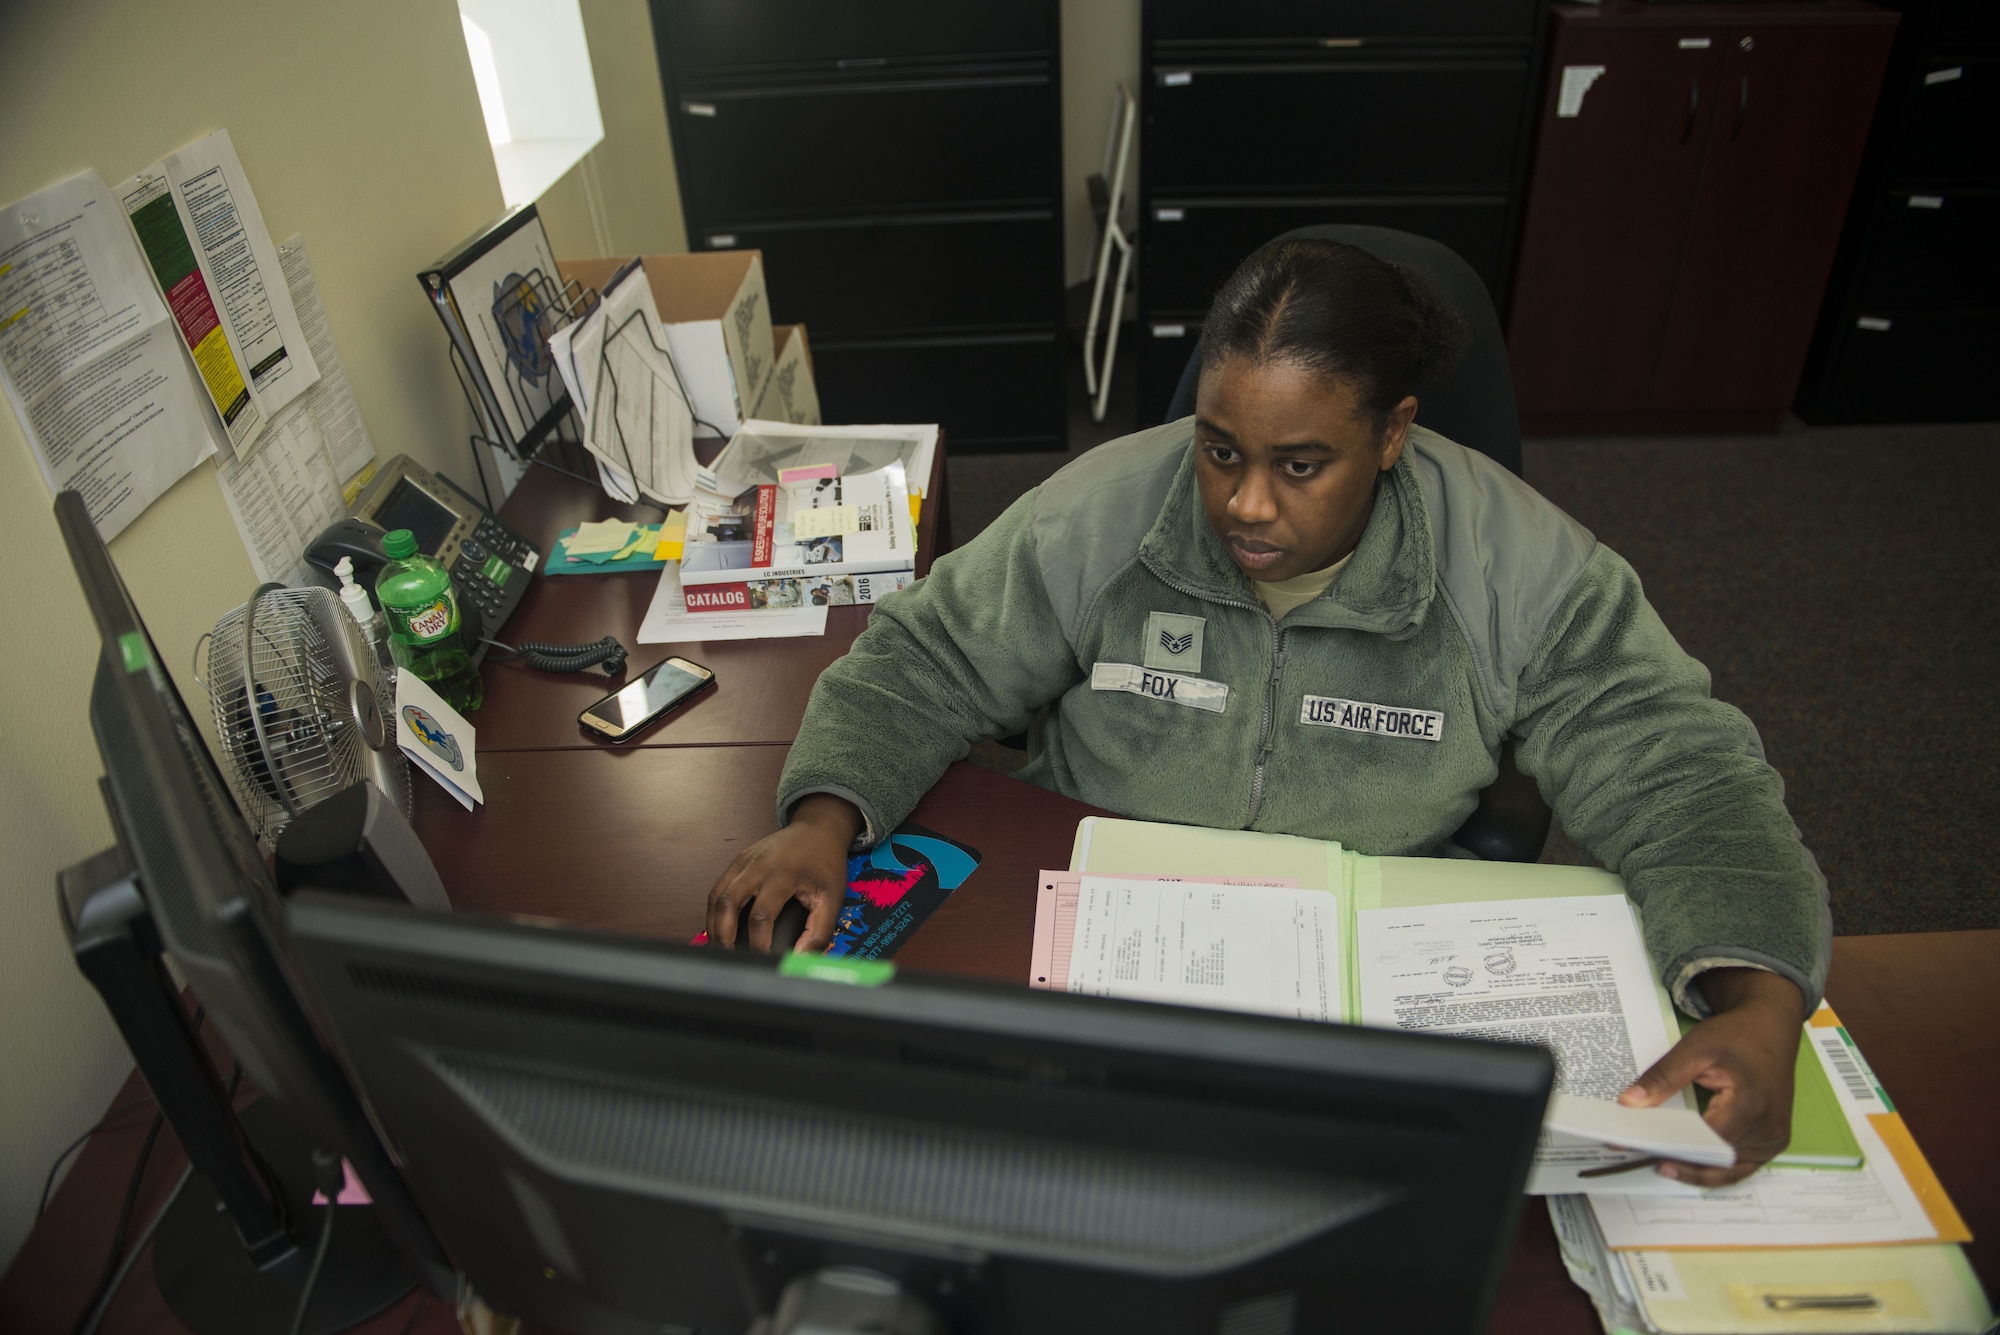 Aviation resource managers maintain flight records and ensure safety and training requirements are met prior to an aircrew member’s flight.